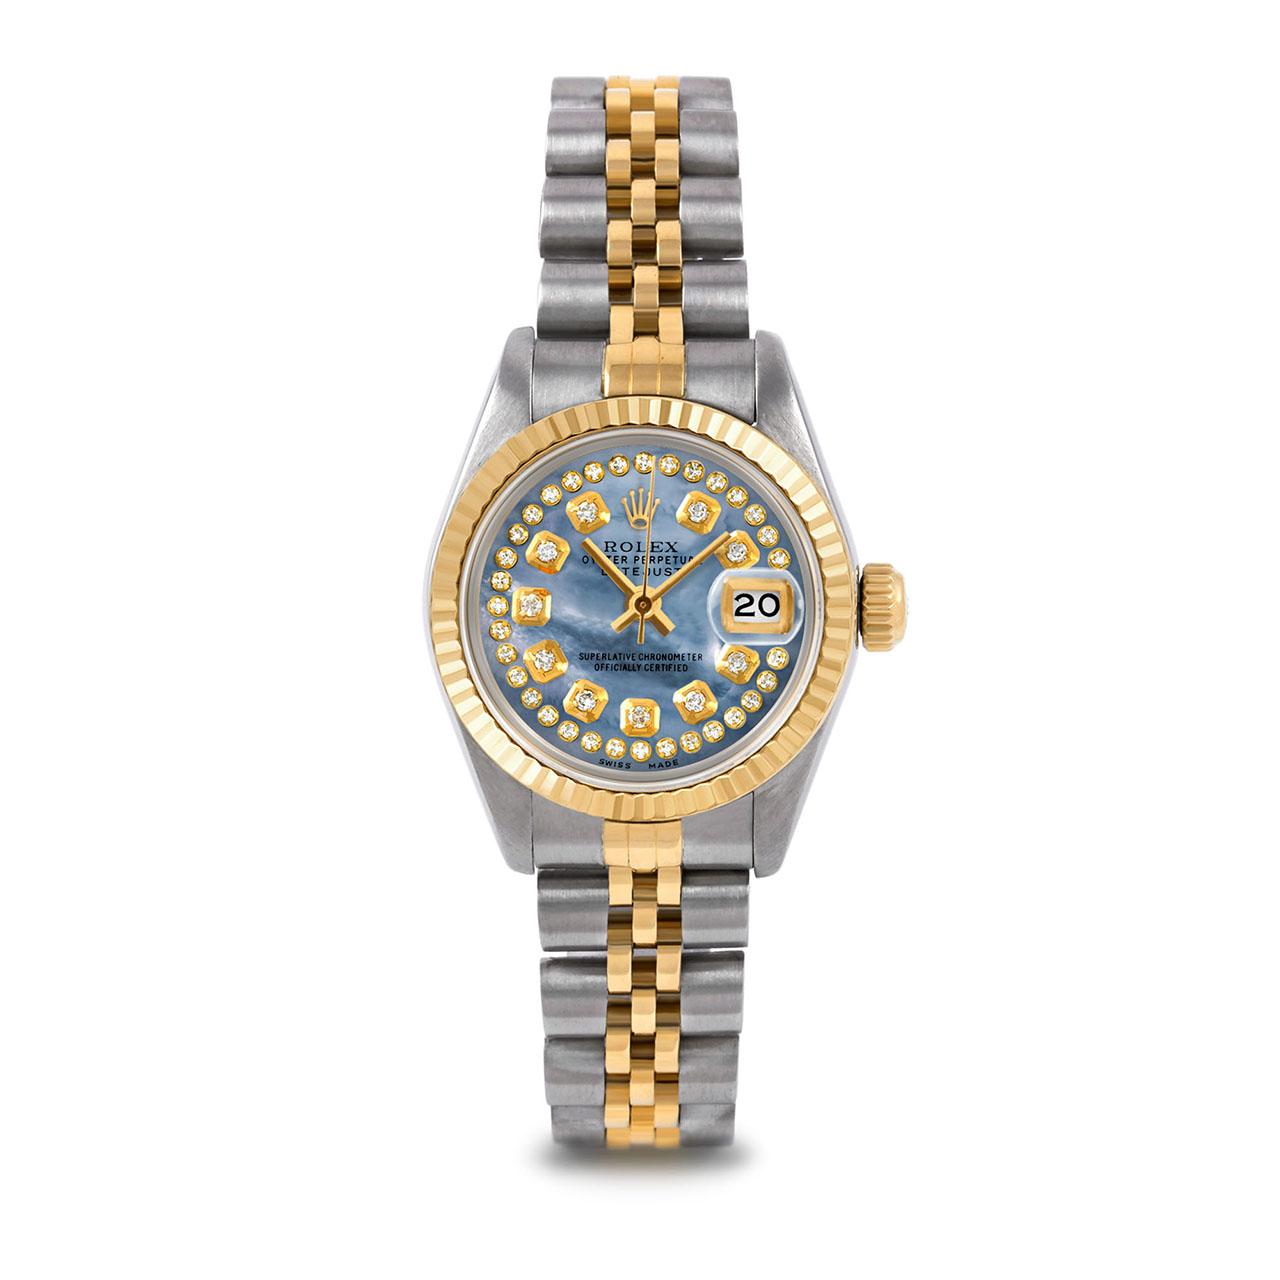 Pre-Owned Rolex 6917 Ladies 26mm Two Tone Datejust Watch, Custom Blue Mother of Pearl String Diamond Dial & Fluted Bezel on Rolex 14K Yellow Gold And Stainless Steel Jubilee Band.   

SKU 6917-TT-BLMOP-STRD-FLT-JBL


Brand/Model:        Rolex